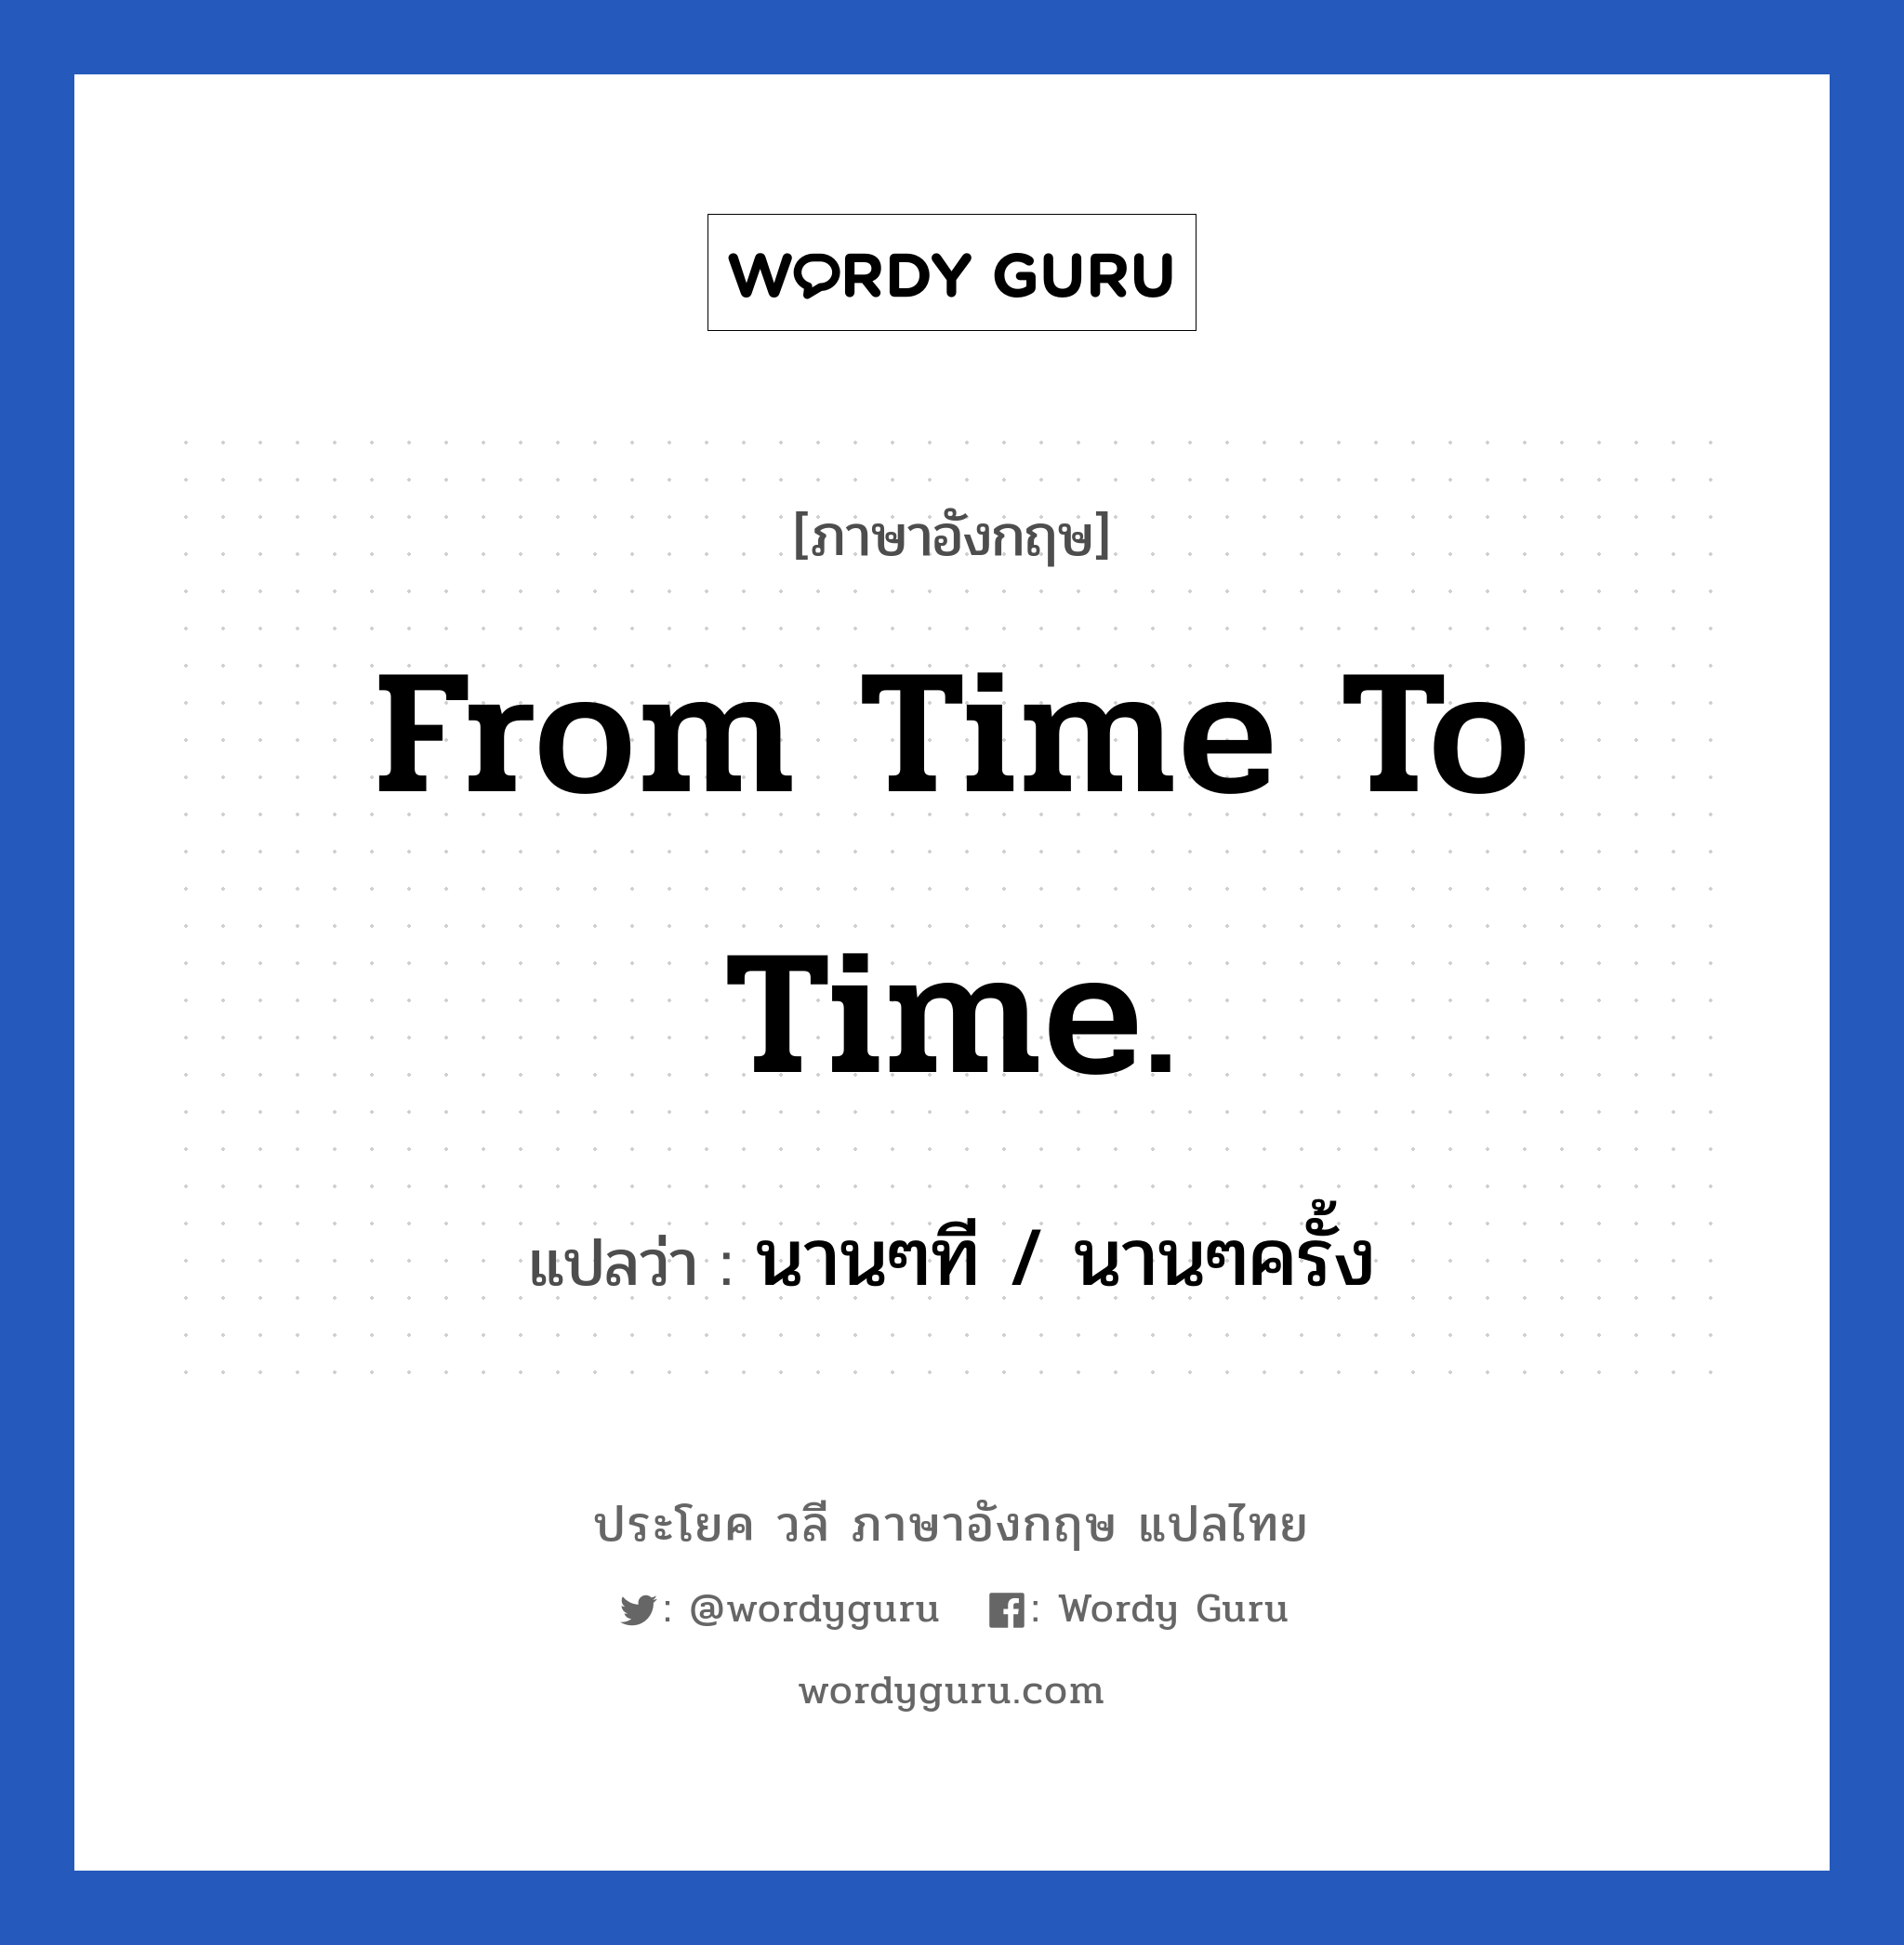 From time to time. แปลว่า?, วลีภาษาอังกฤษ From time to time. แปลว่า นานๆที / นานๆครั้ง